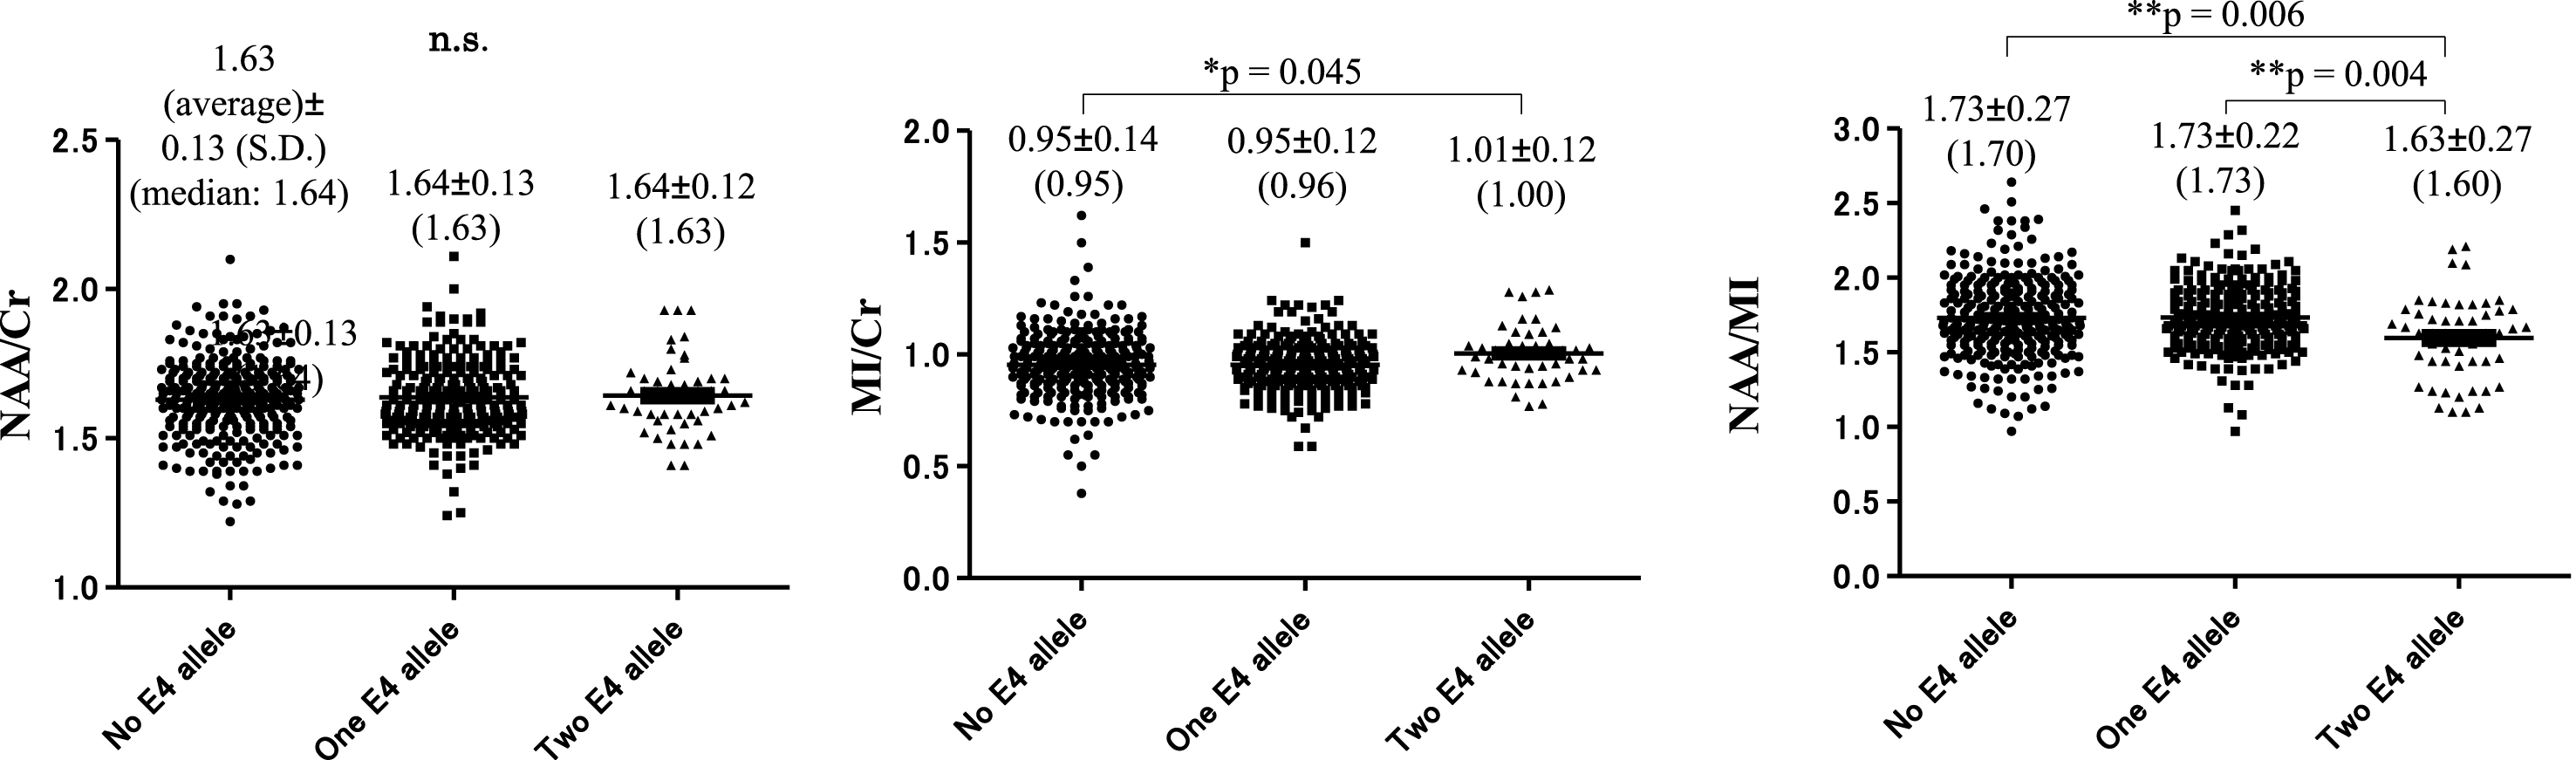 Number of apolipoprotein E ɛ4 alleles and NAA/Cr, MI/Cr, and NAA/MI ratio at baseline. There was no significant difference between subjects with the ɛ4 allele and subjects without the ɛ4 allele in NAA/Cr ratio. MI/Cr ratio at baseline was significantly increased in subjects with two copies of the ɛ4 allele: 1.01±0.12 (1.00) compared with subjects without the ɛ4 allele: 0.95±0.14 (0.95) (*p = 0.045). The NAA/MI ratio at baseline was significantly decreased in subjects with two copies of the ɛ4 allele 1.63±0.27 (1.60) compared with subjects with one copy of the ɛ4 allele 1.73±0.22 (1.73) (**p = 0.004) and subjects without the ɛ4 allele: 1.73±0.27 (1.70), (**p = 0.006).